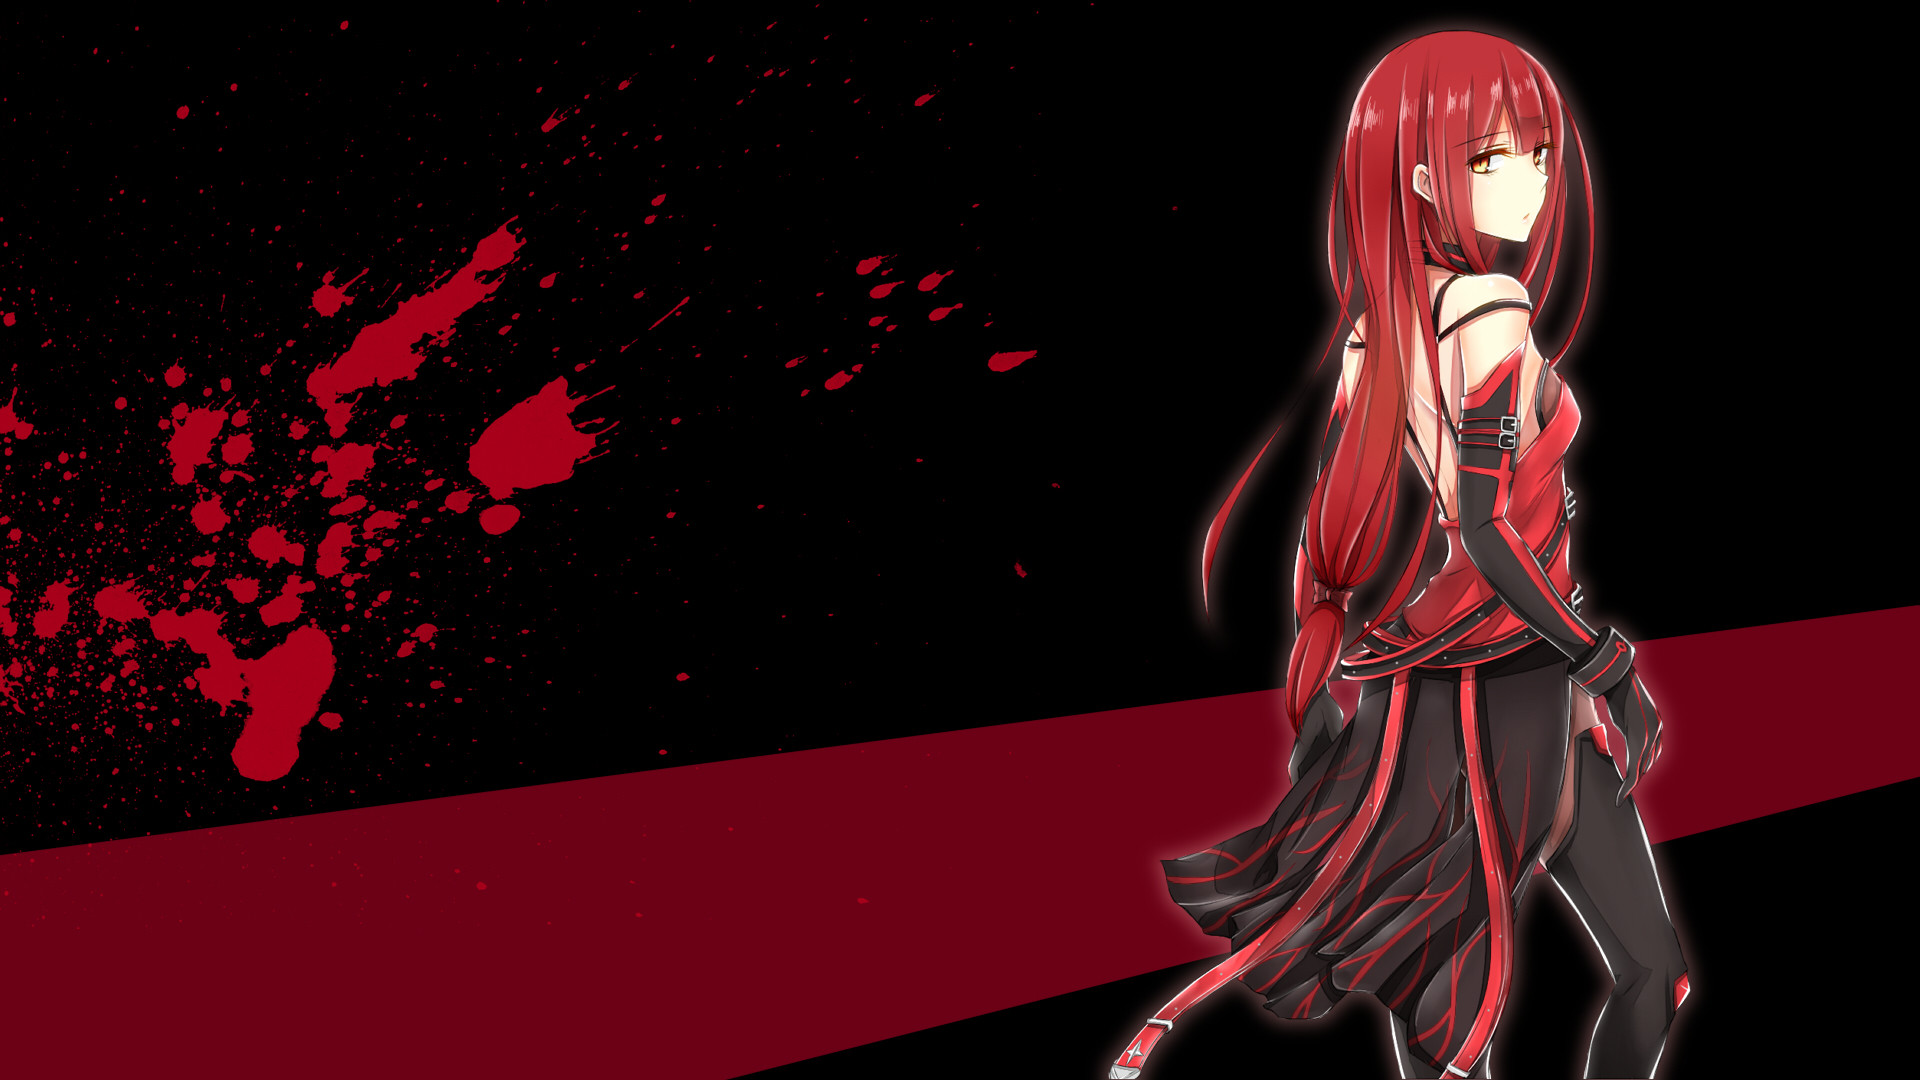 Anime girl with long red hair and a black and red outfit - Crimson